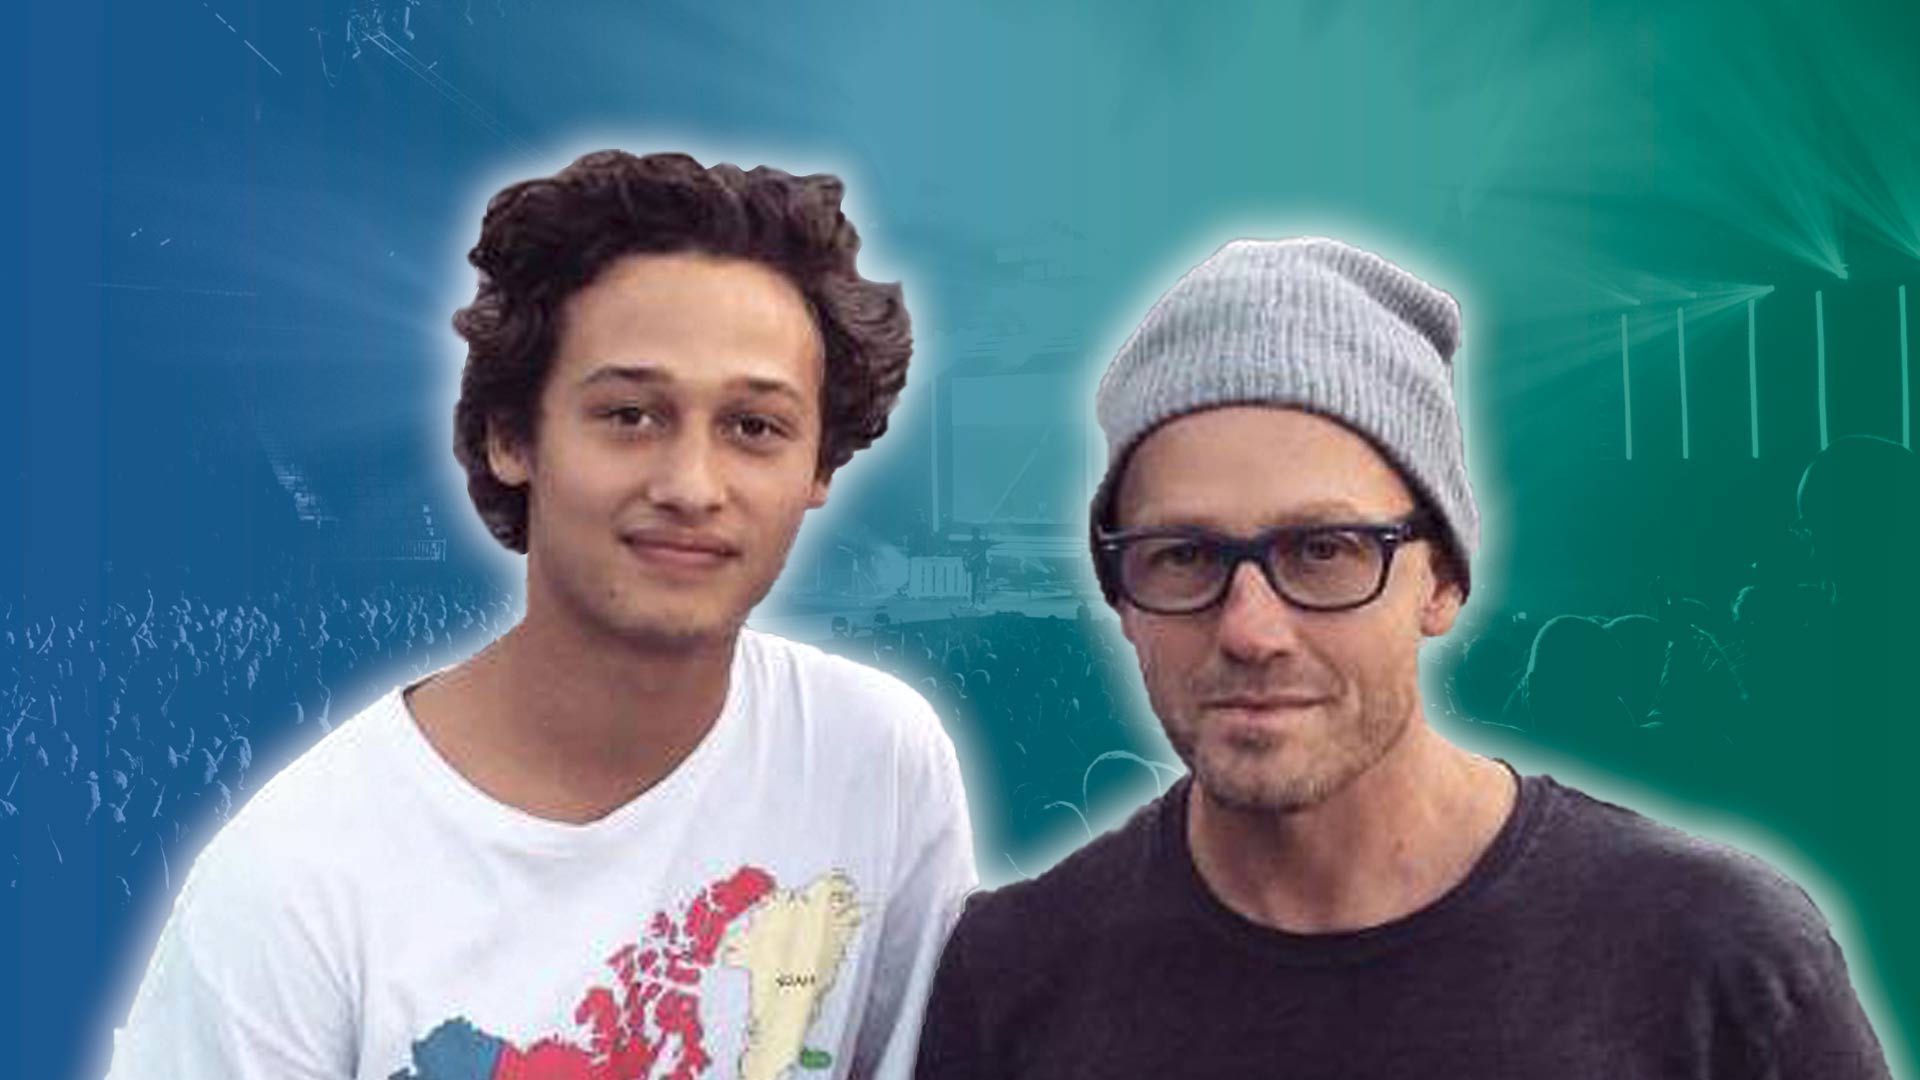 TobyMac Talks Candidly on 'Good Morning America' About His Son's